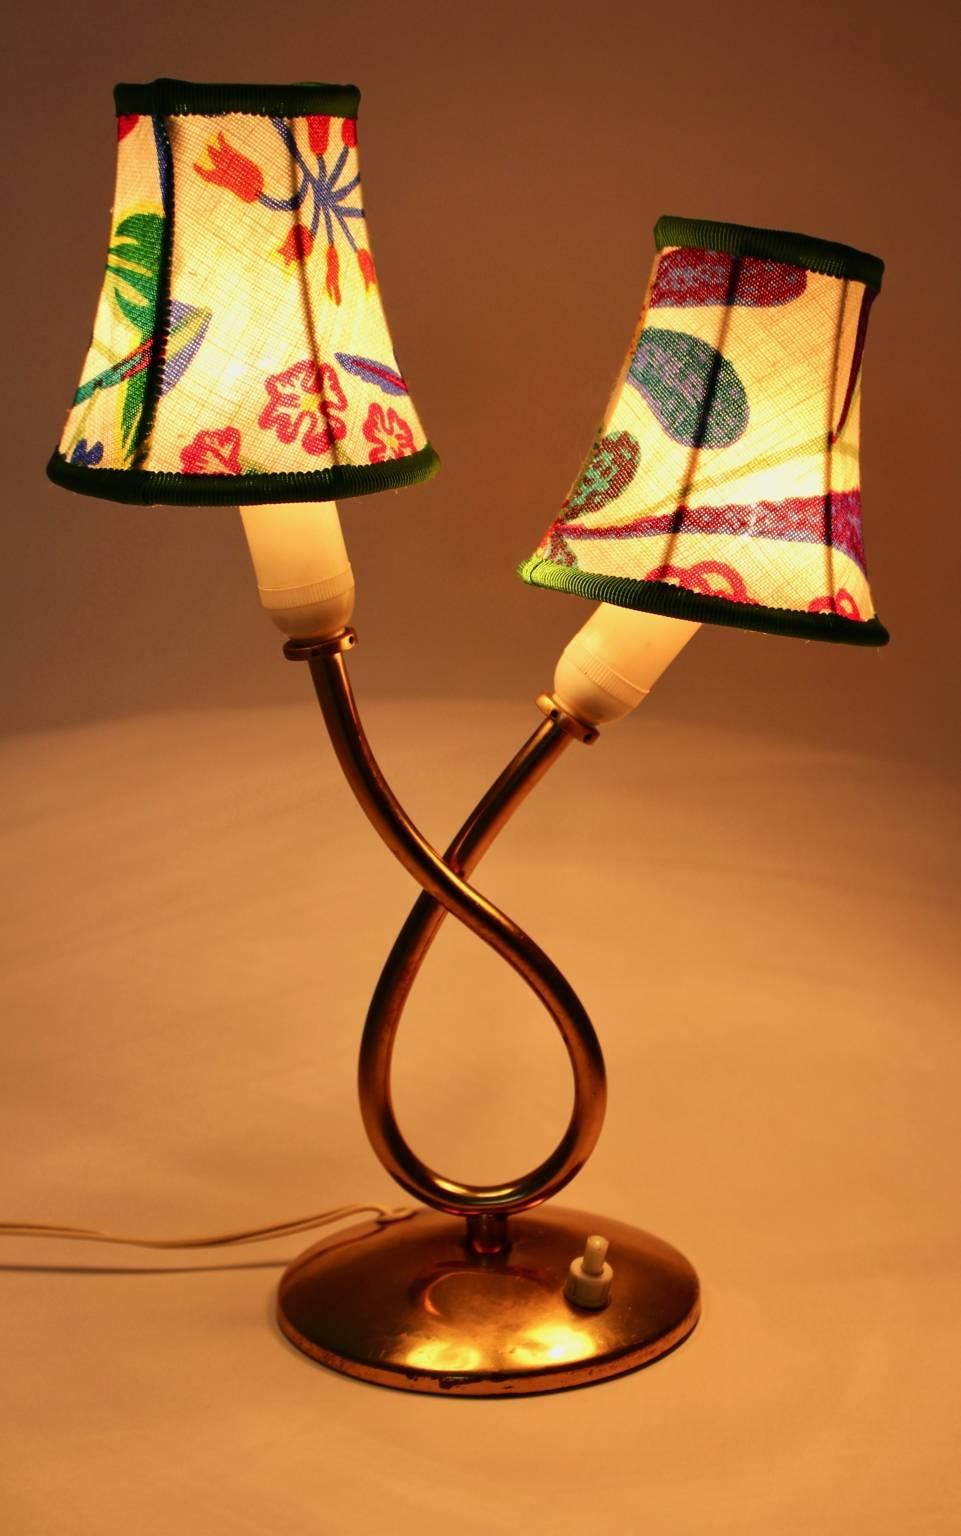 This pretty curved and charming brass vintage table lamp was made of brass and was designed by Josef Frank for Svenskt Tenn, Sweden, 1950.

Also the lamp shades are renewed and covered with high-quality Josef Frank hand printed colorful textile